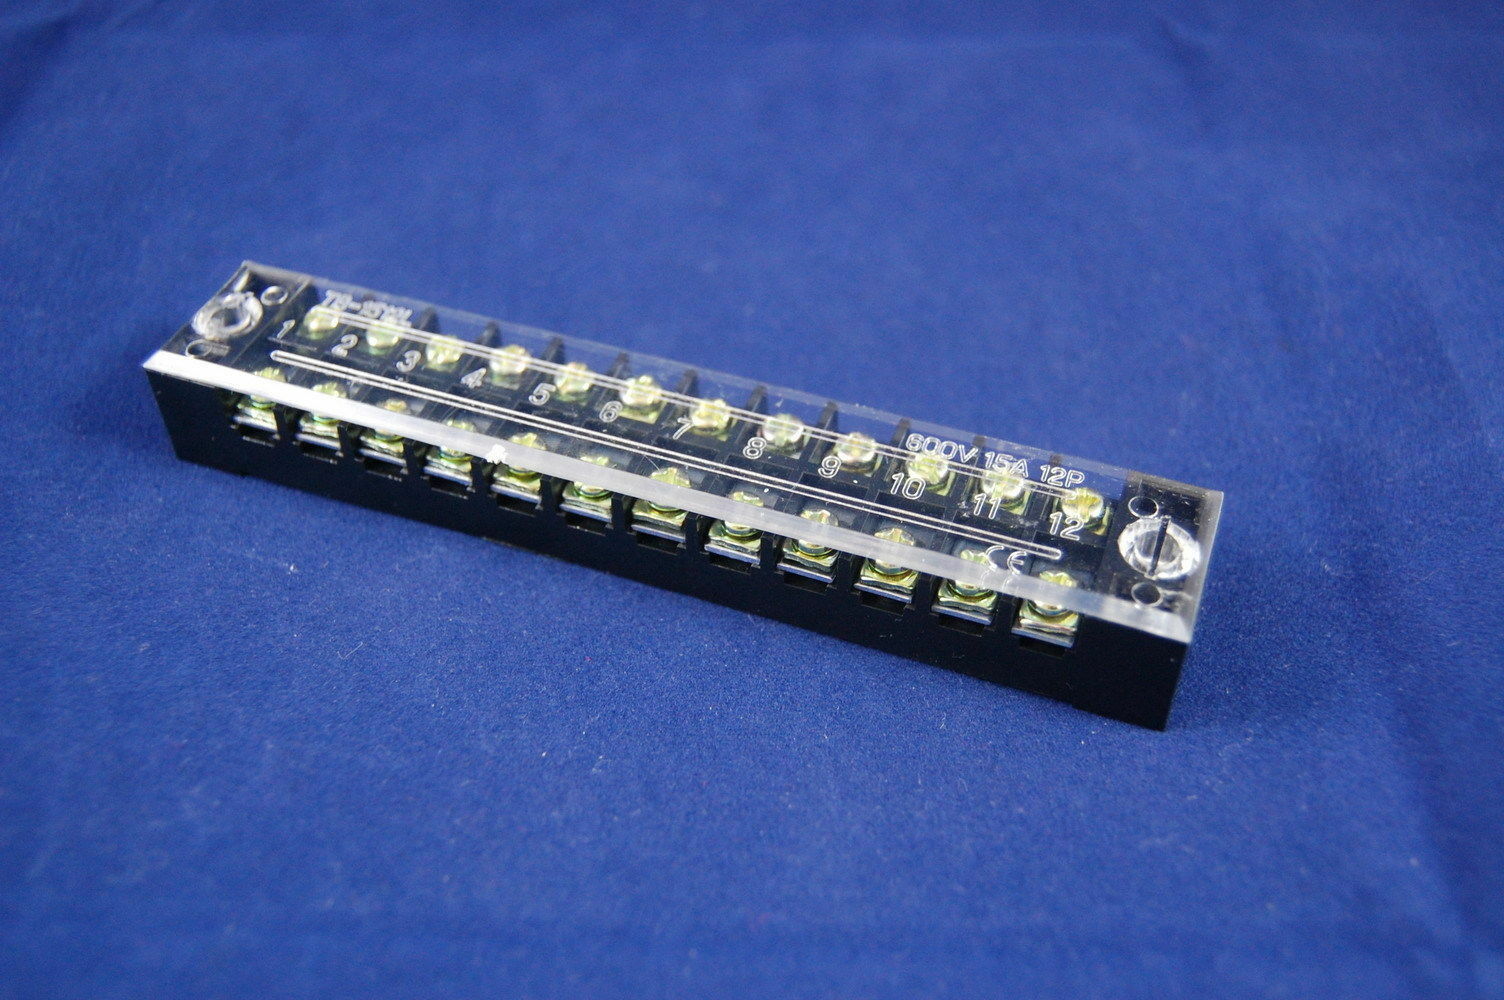 Lot of 100pcs 12 Position 15A 600V Barrier Dual Row Terminal Block/Strip w/Cover